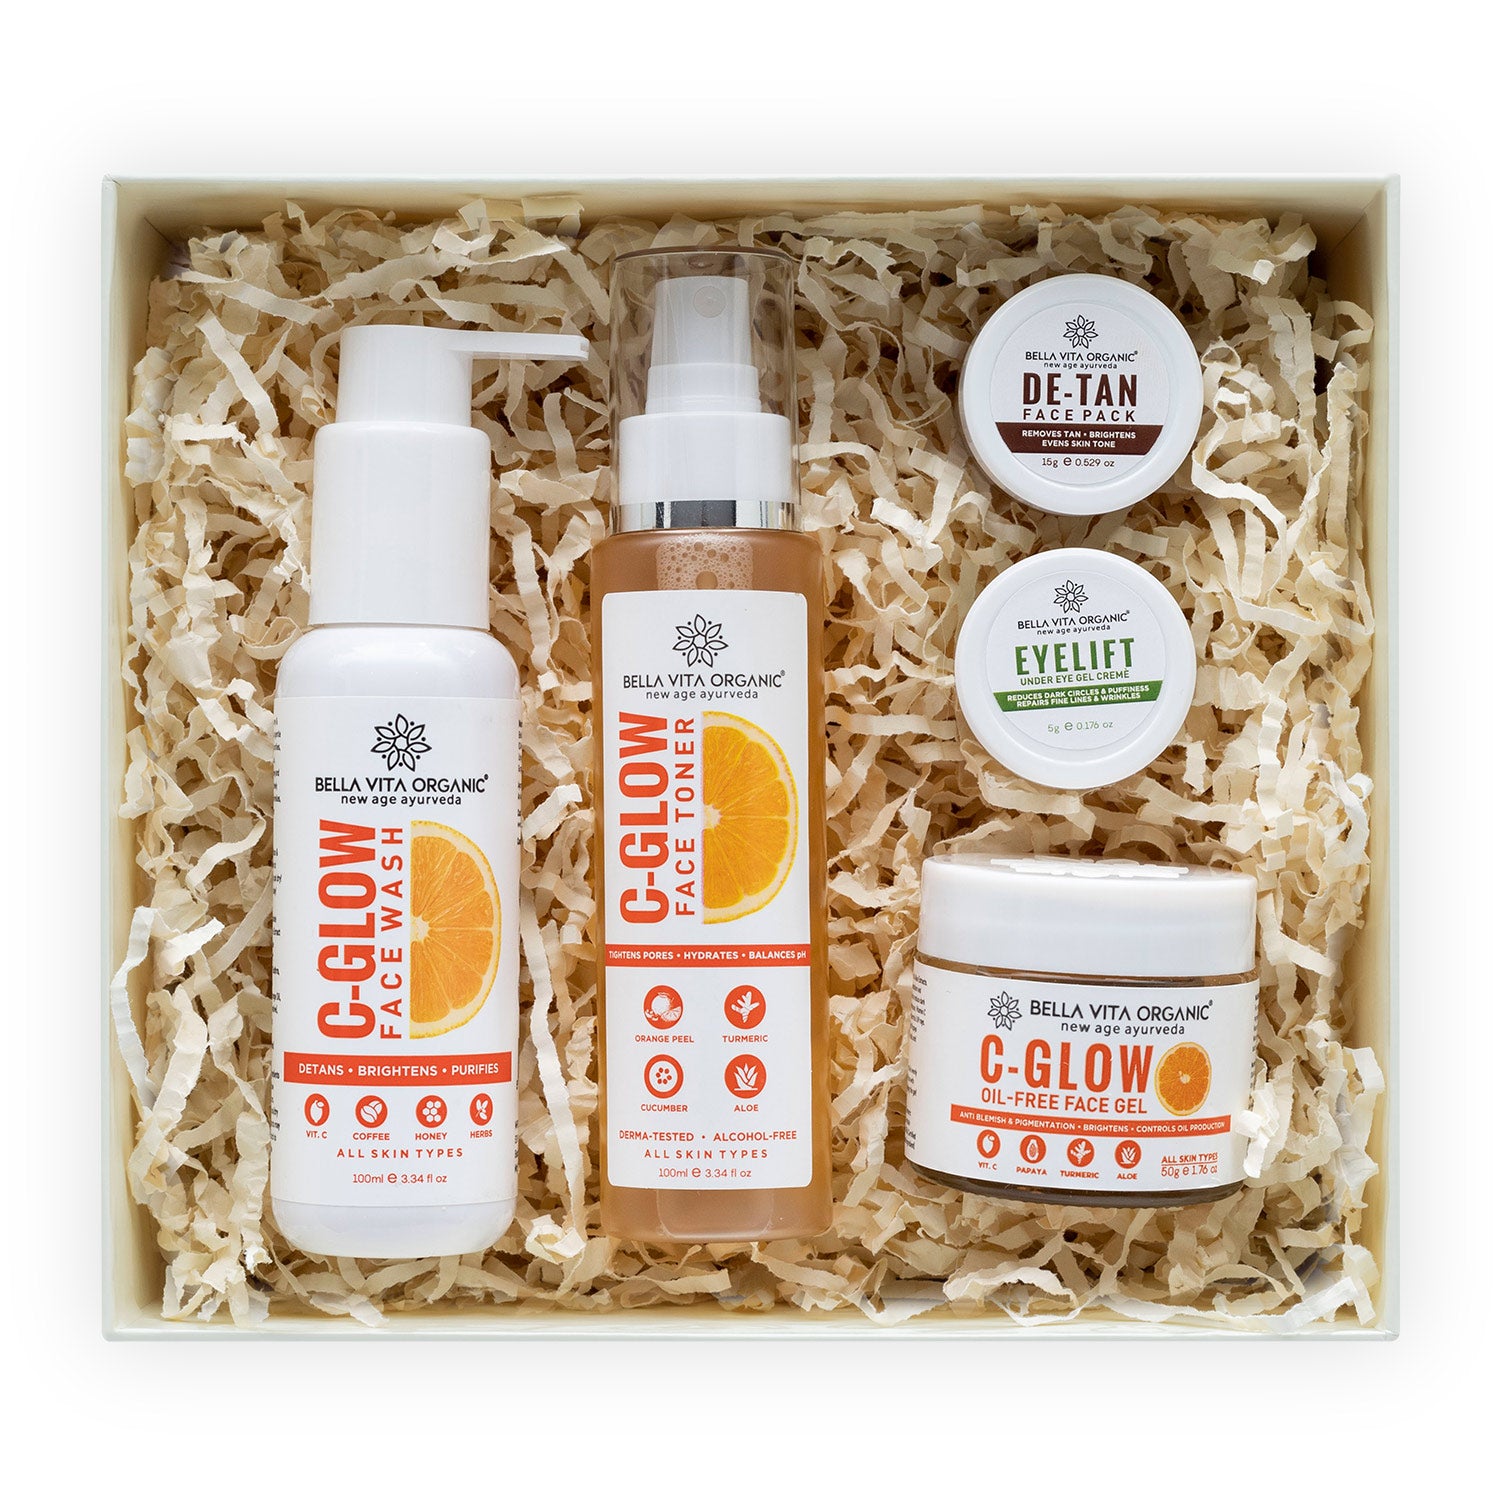 The Radiance Gift Box